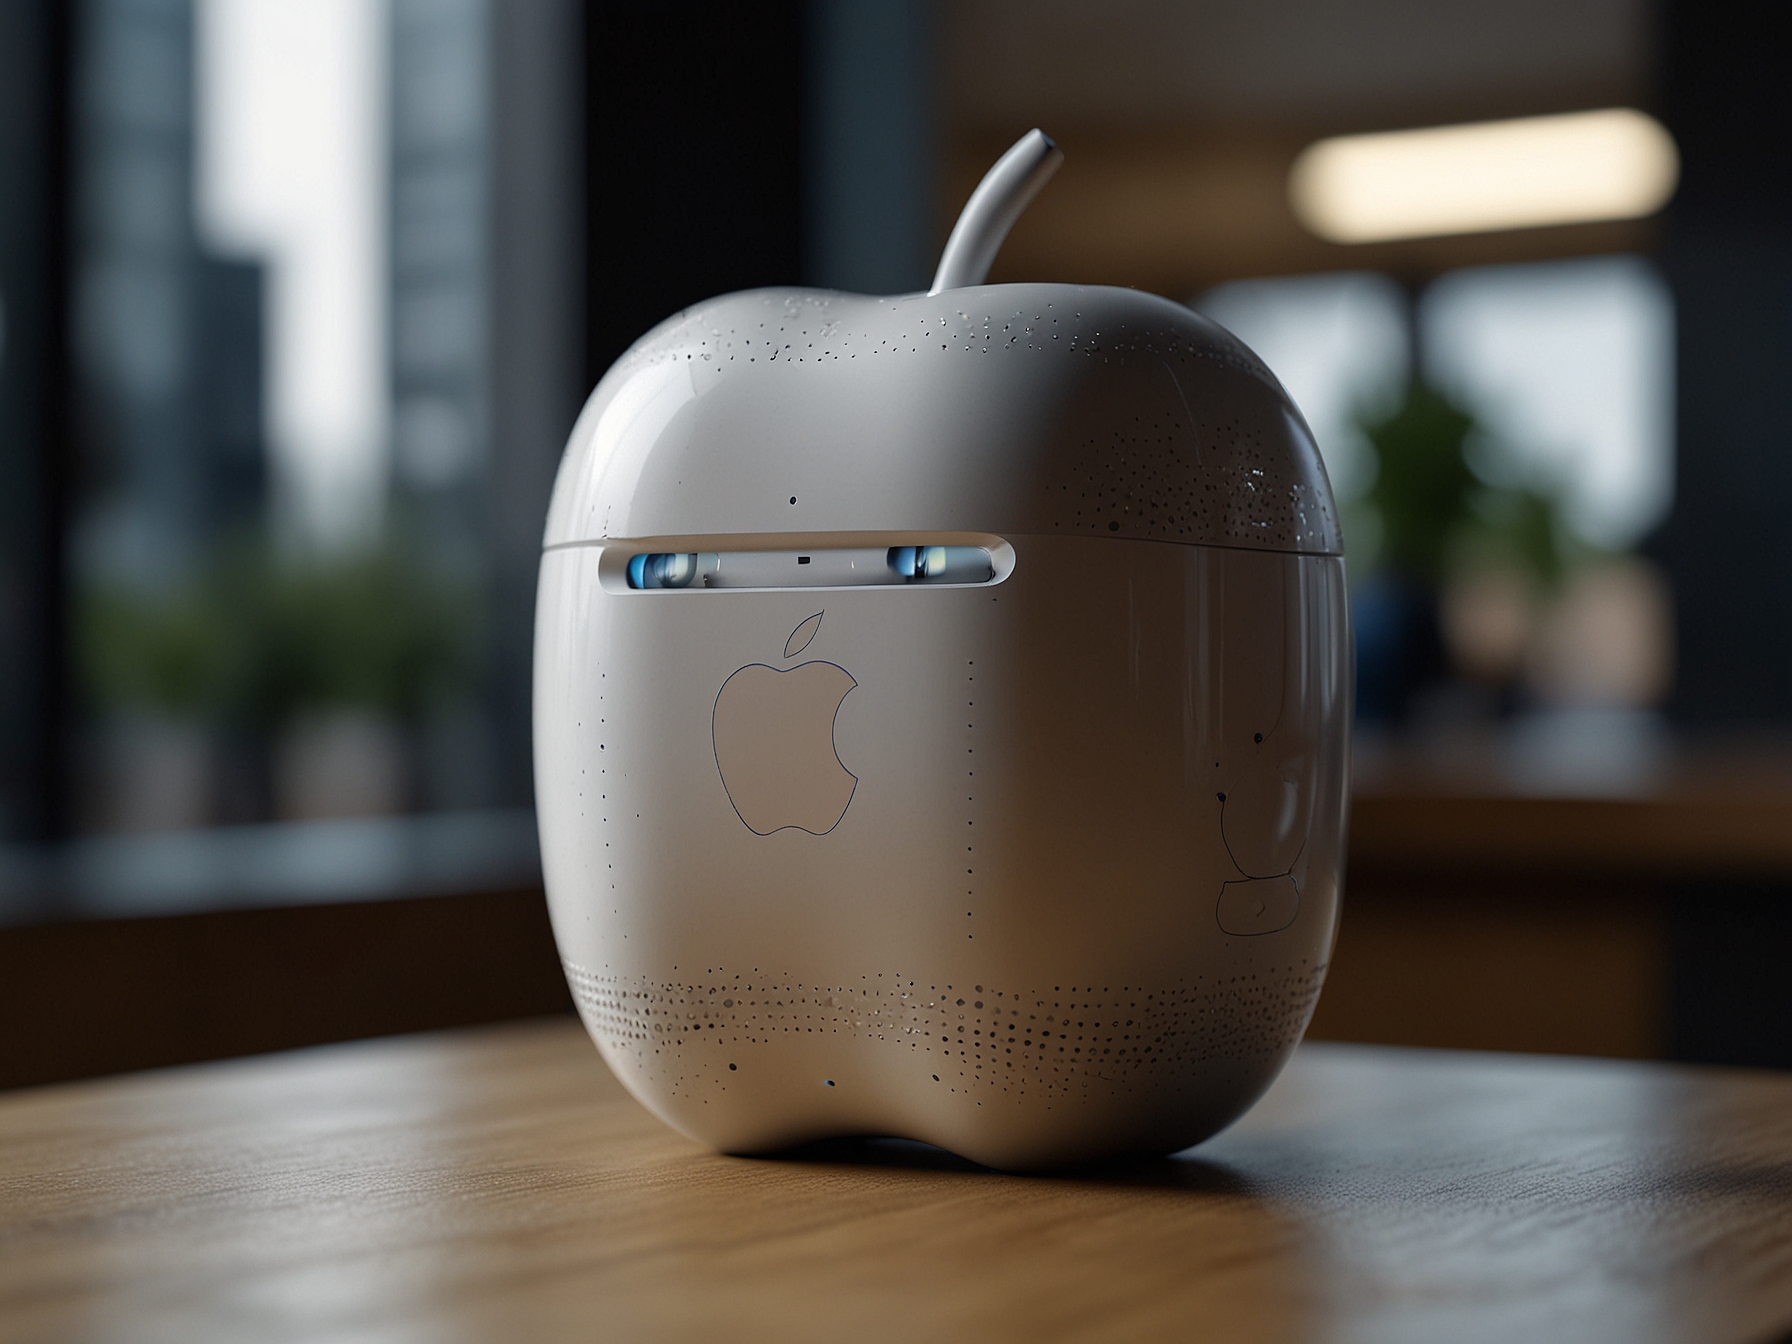 An image of Apple's virtual assistant device on display, symbolizing the AI features delayed in Europe due to strict EU tech regulations.